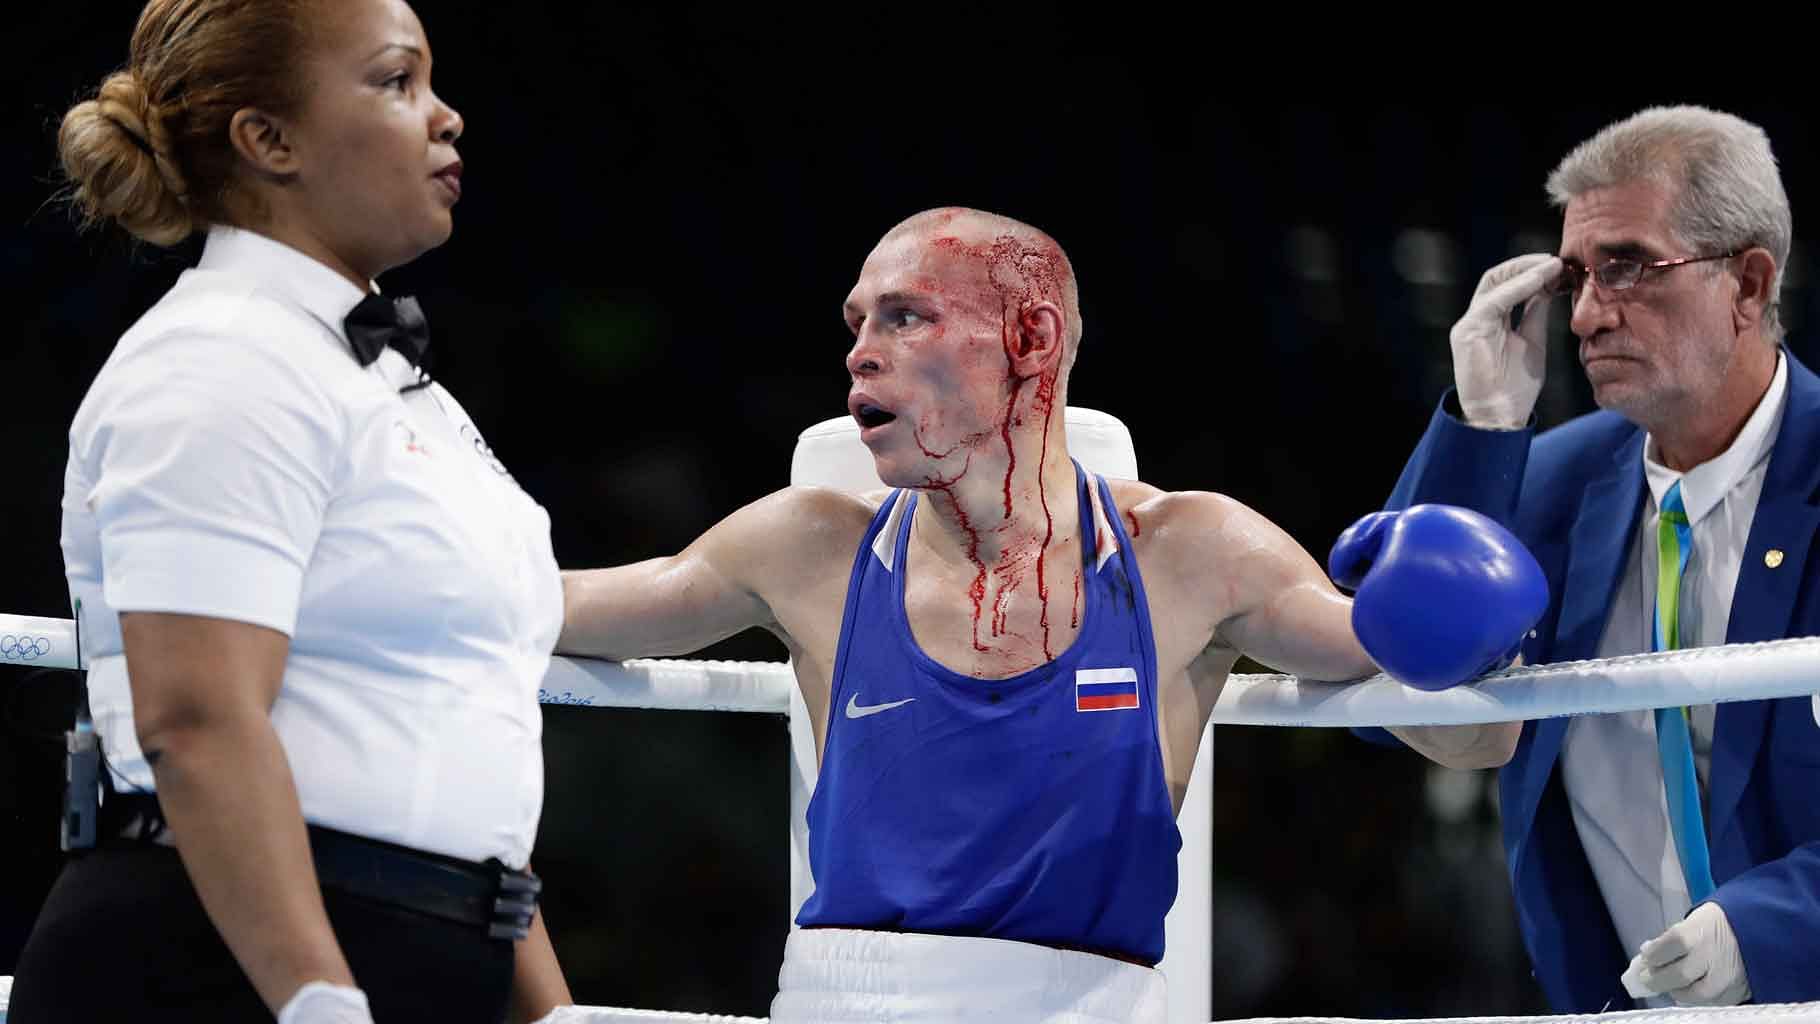  Referee stops the fight to have Russia’s Nikitin Vladimir’s cuts treated as Vladimir fights Vanuatu’s Boe Warawara during a men’s bantamweight 56-kg preliminary boxing match at the 2016 Summer Olympics in Rio de Janeiro, Brazil. (Photo: AP)